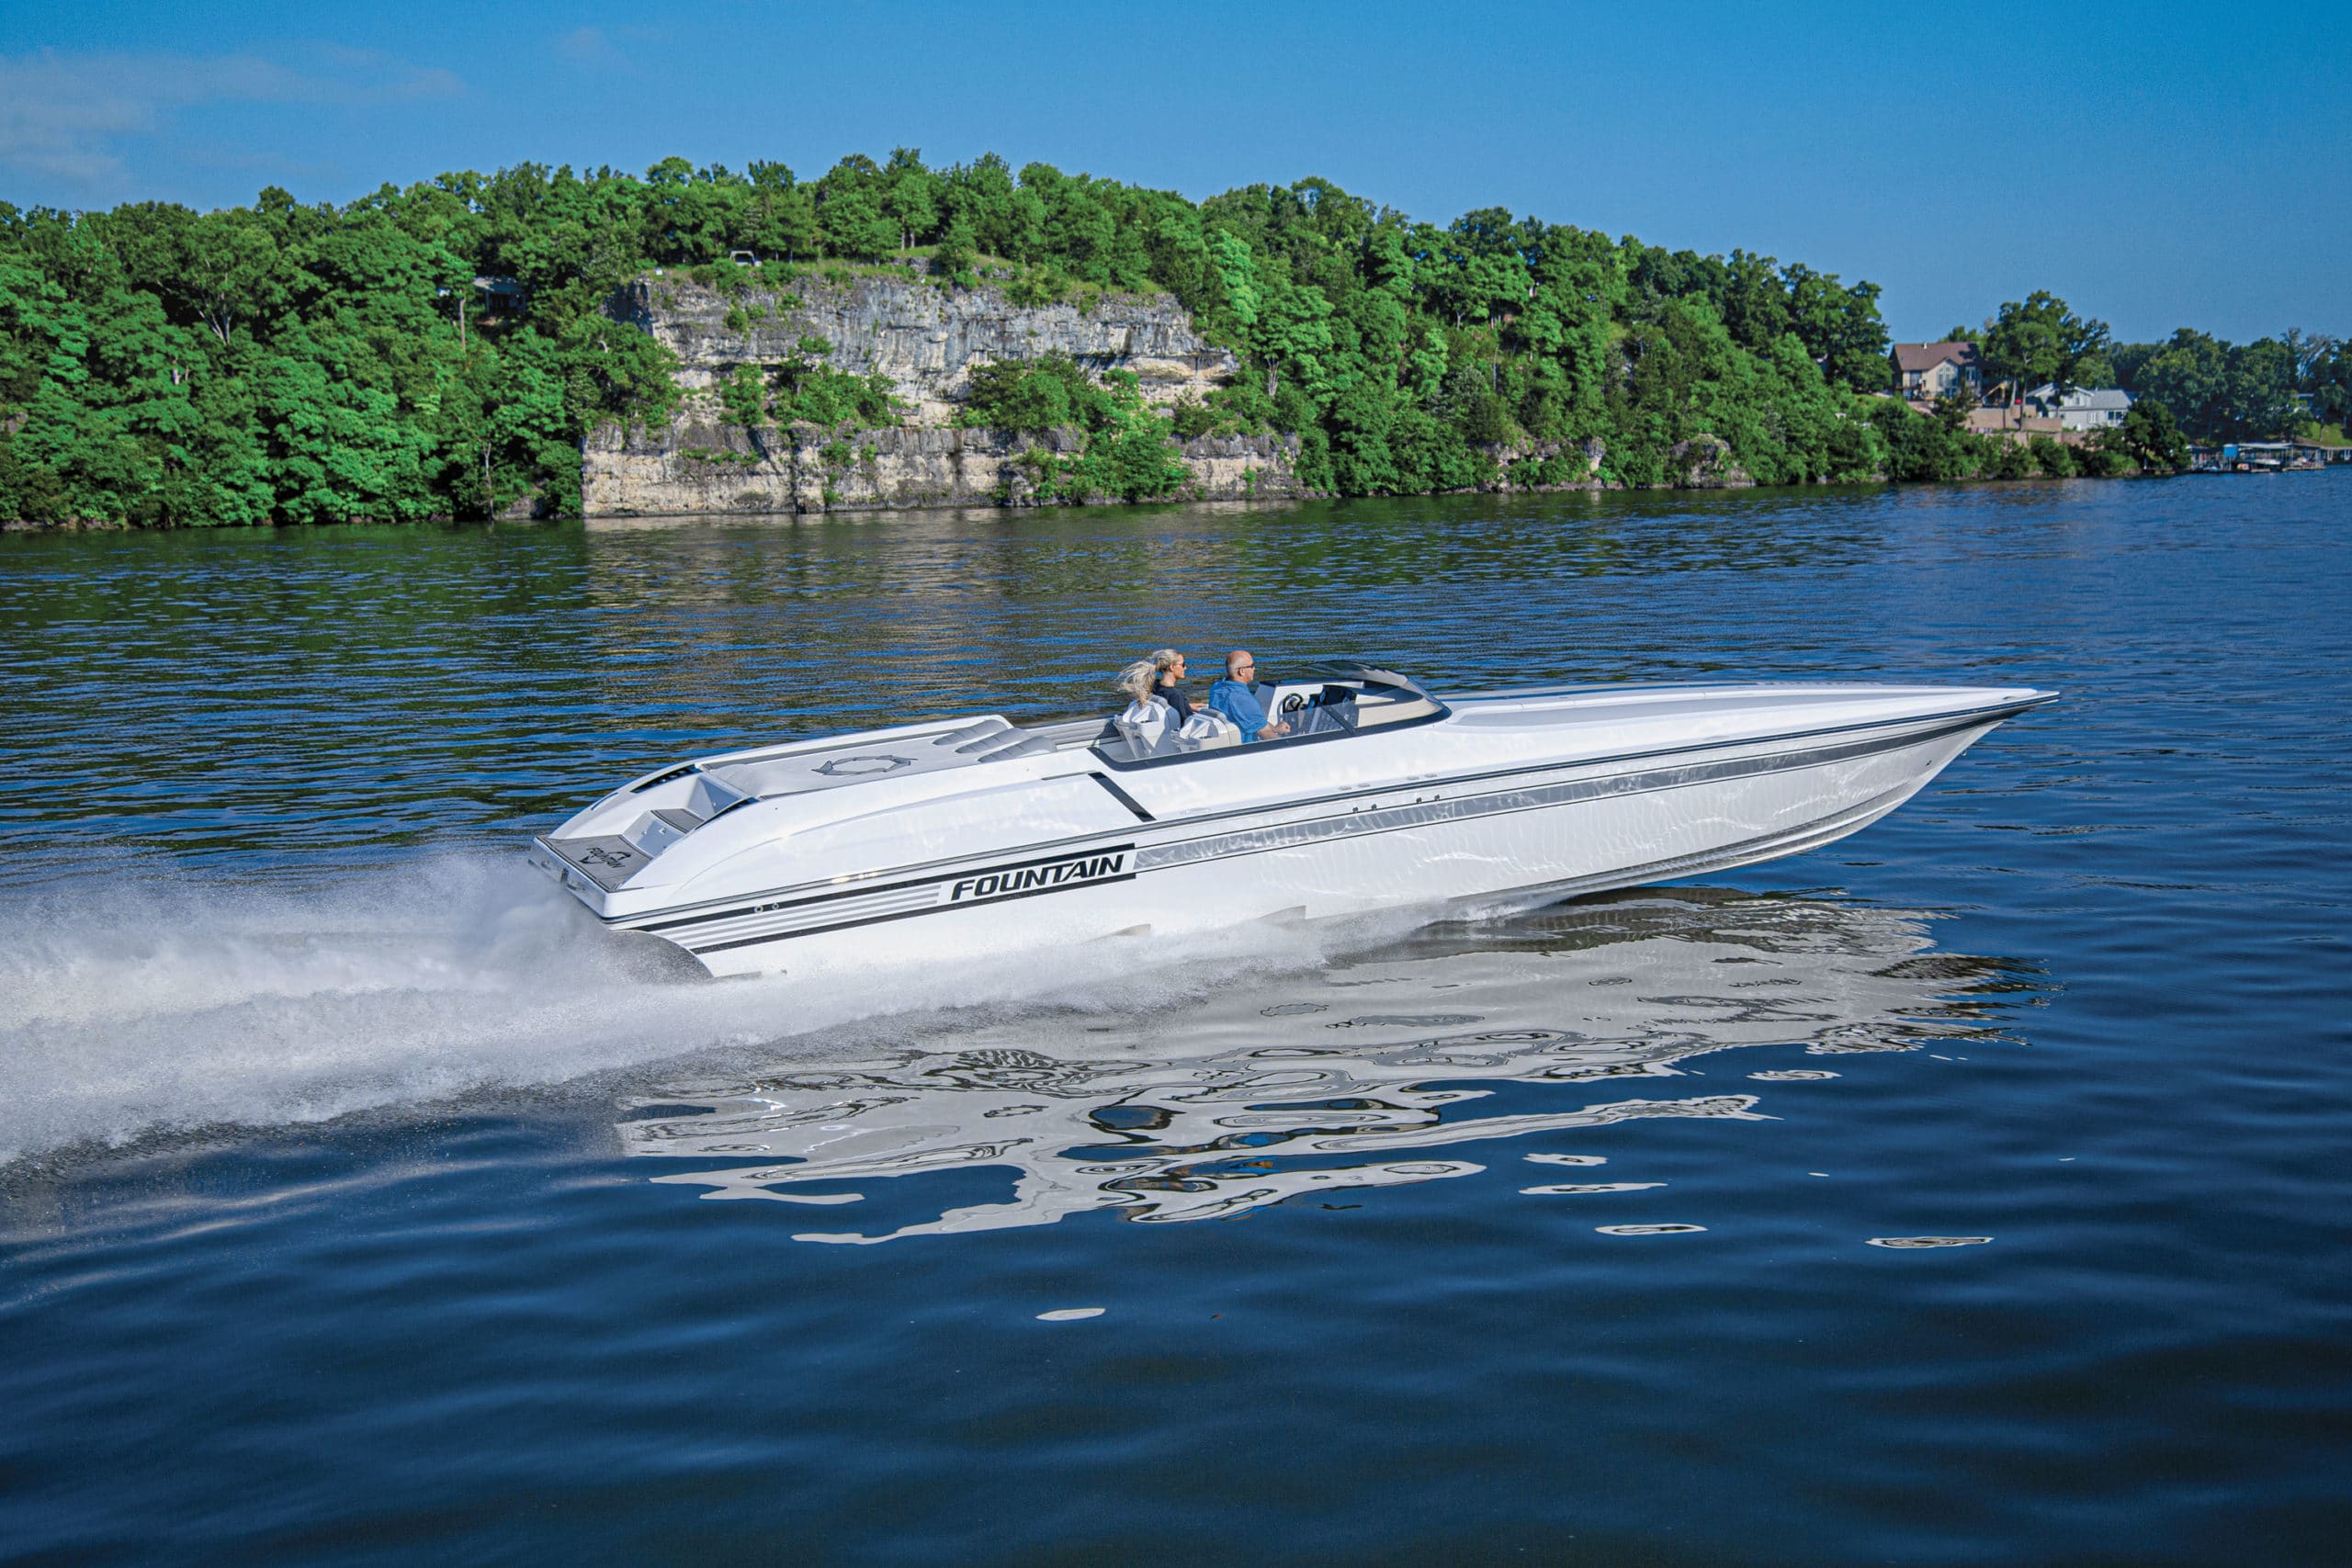 2021 Fountain 42 Lightning Boat Test, Pricing, Specs